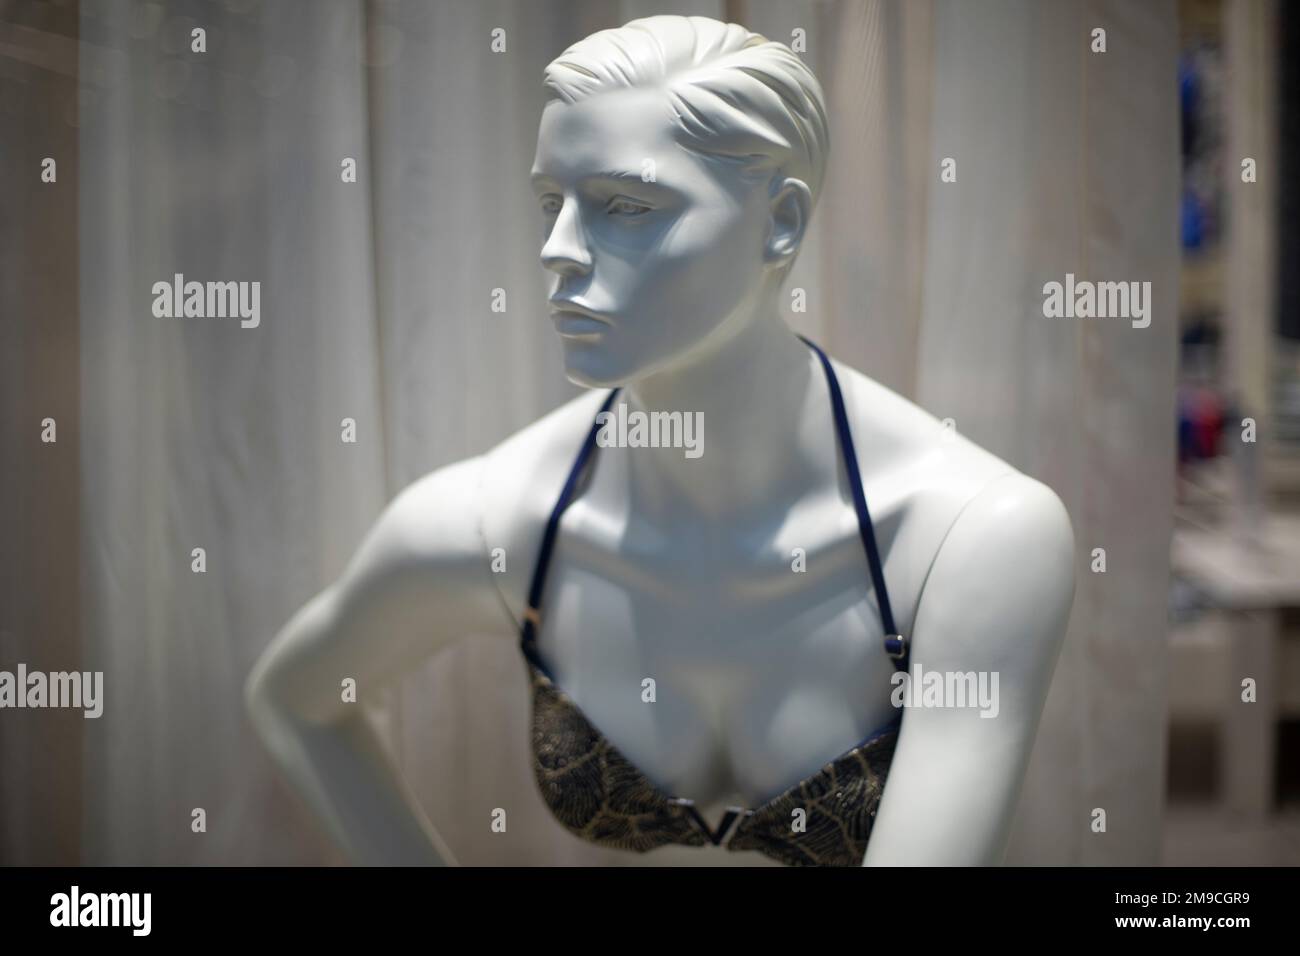 Women's mannequin in clothing store. Plastic figure of woman. Stock Photo